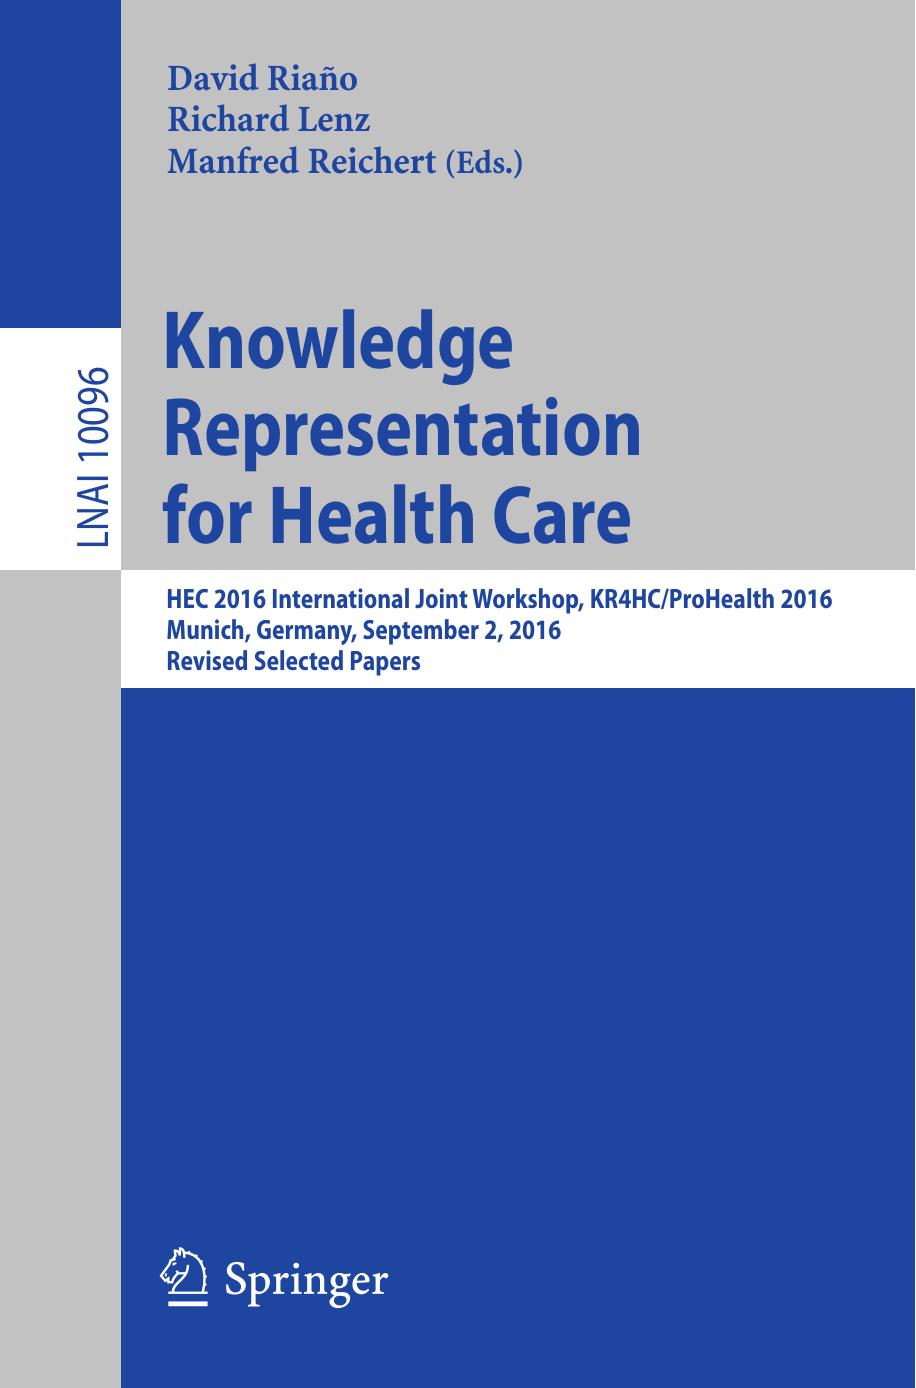 Knowledge Representation for Health Care: HEC 2016 International Joint Workshop, KR4HC/ProHealth 2016, Munich, Germany, September 2, 2016, Revised Selected Papers